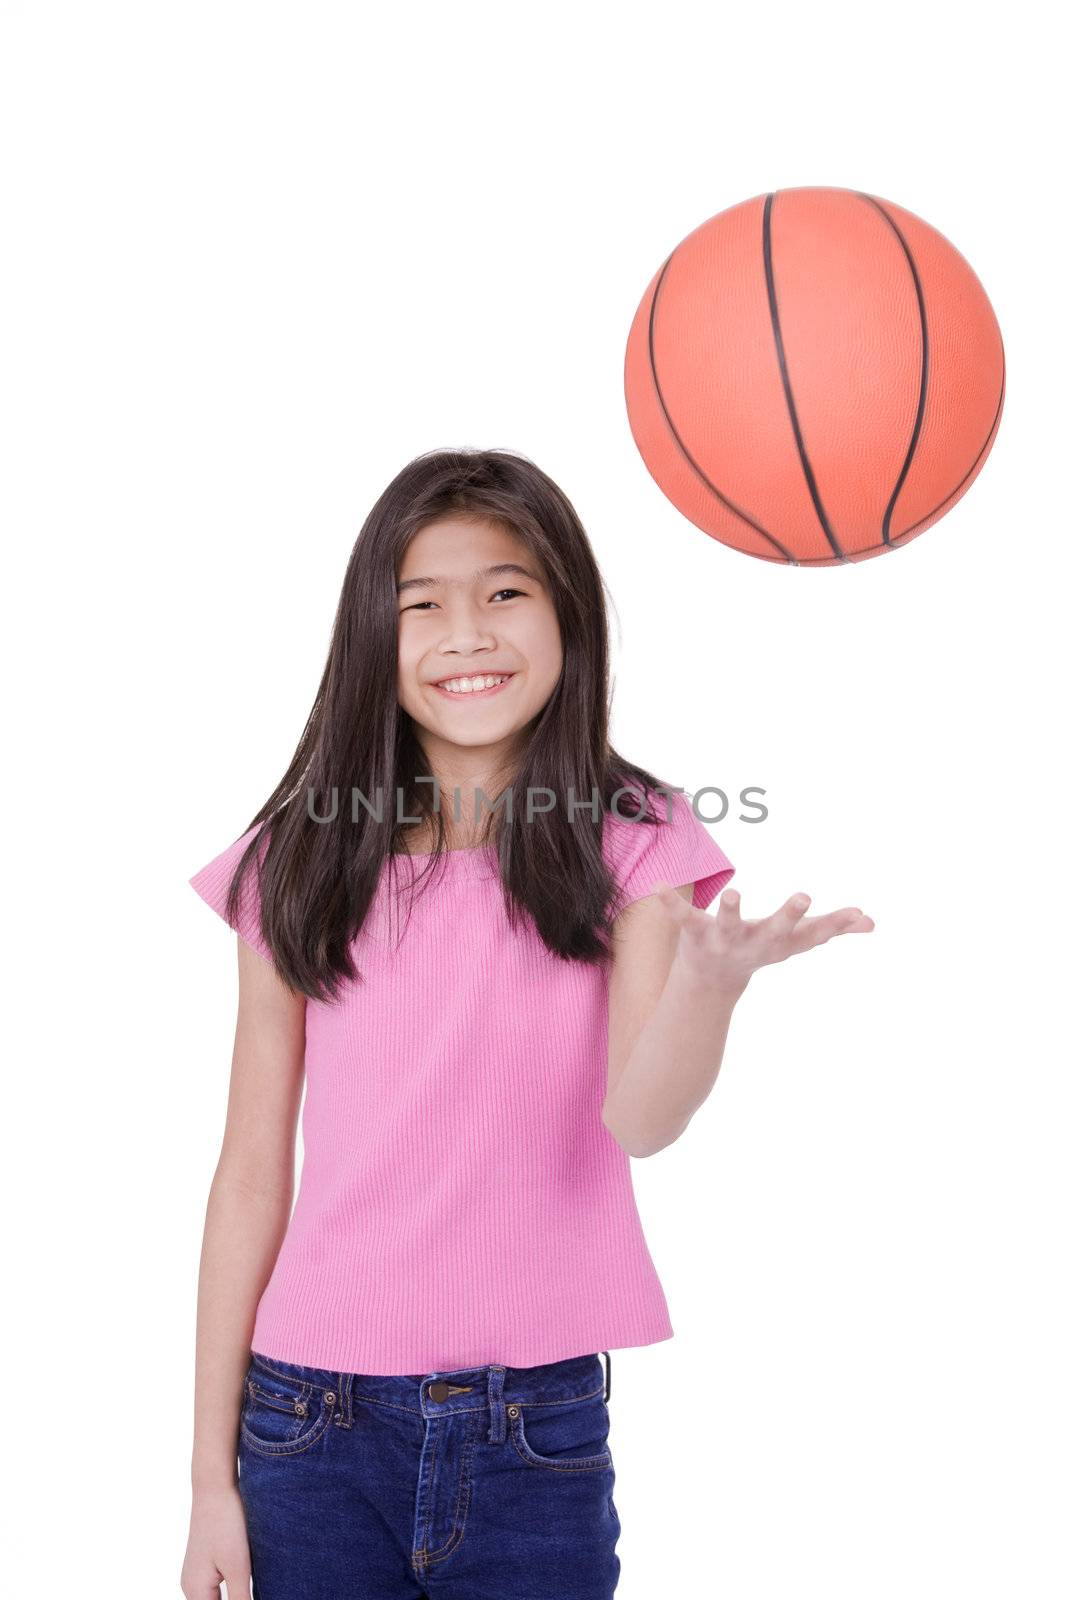 Ten year old Asian girl throwing basketball up into air, isolated on white